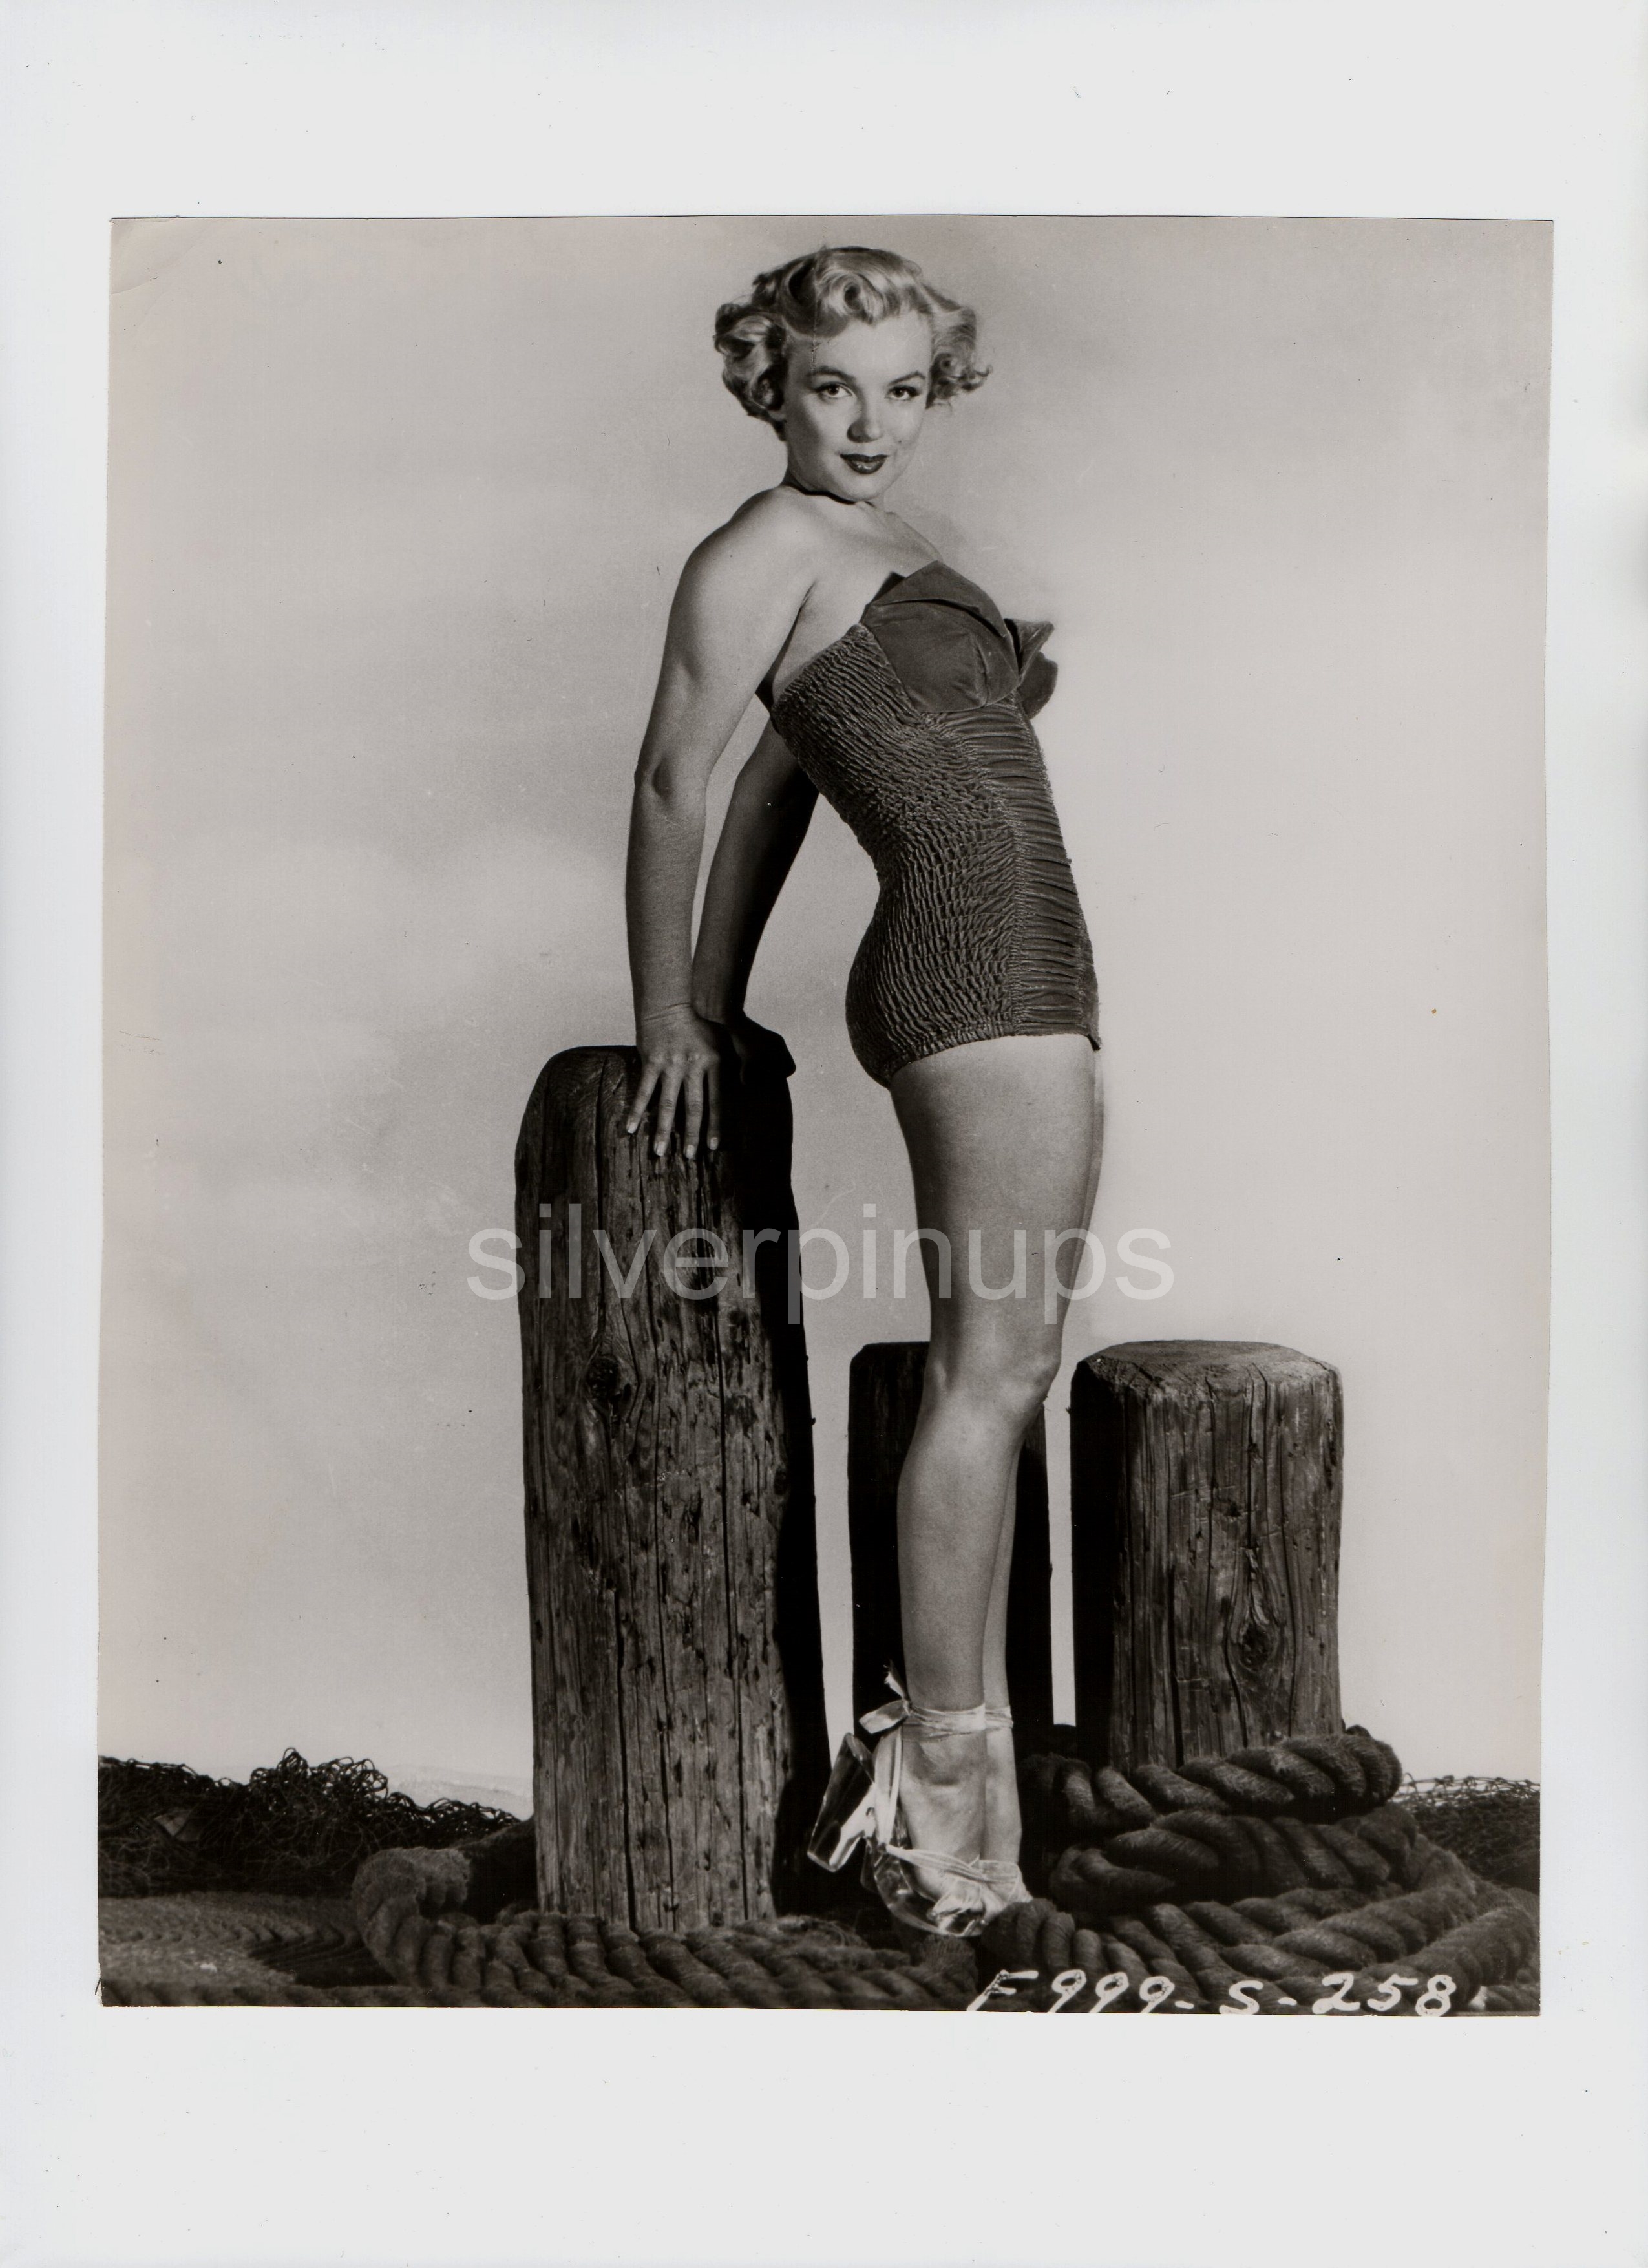 Orig 1951 Marilyn Monroe In Swimsuit Rare Pin Up Portrait… Gorgeous Silverpinups